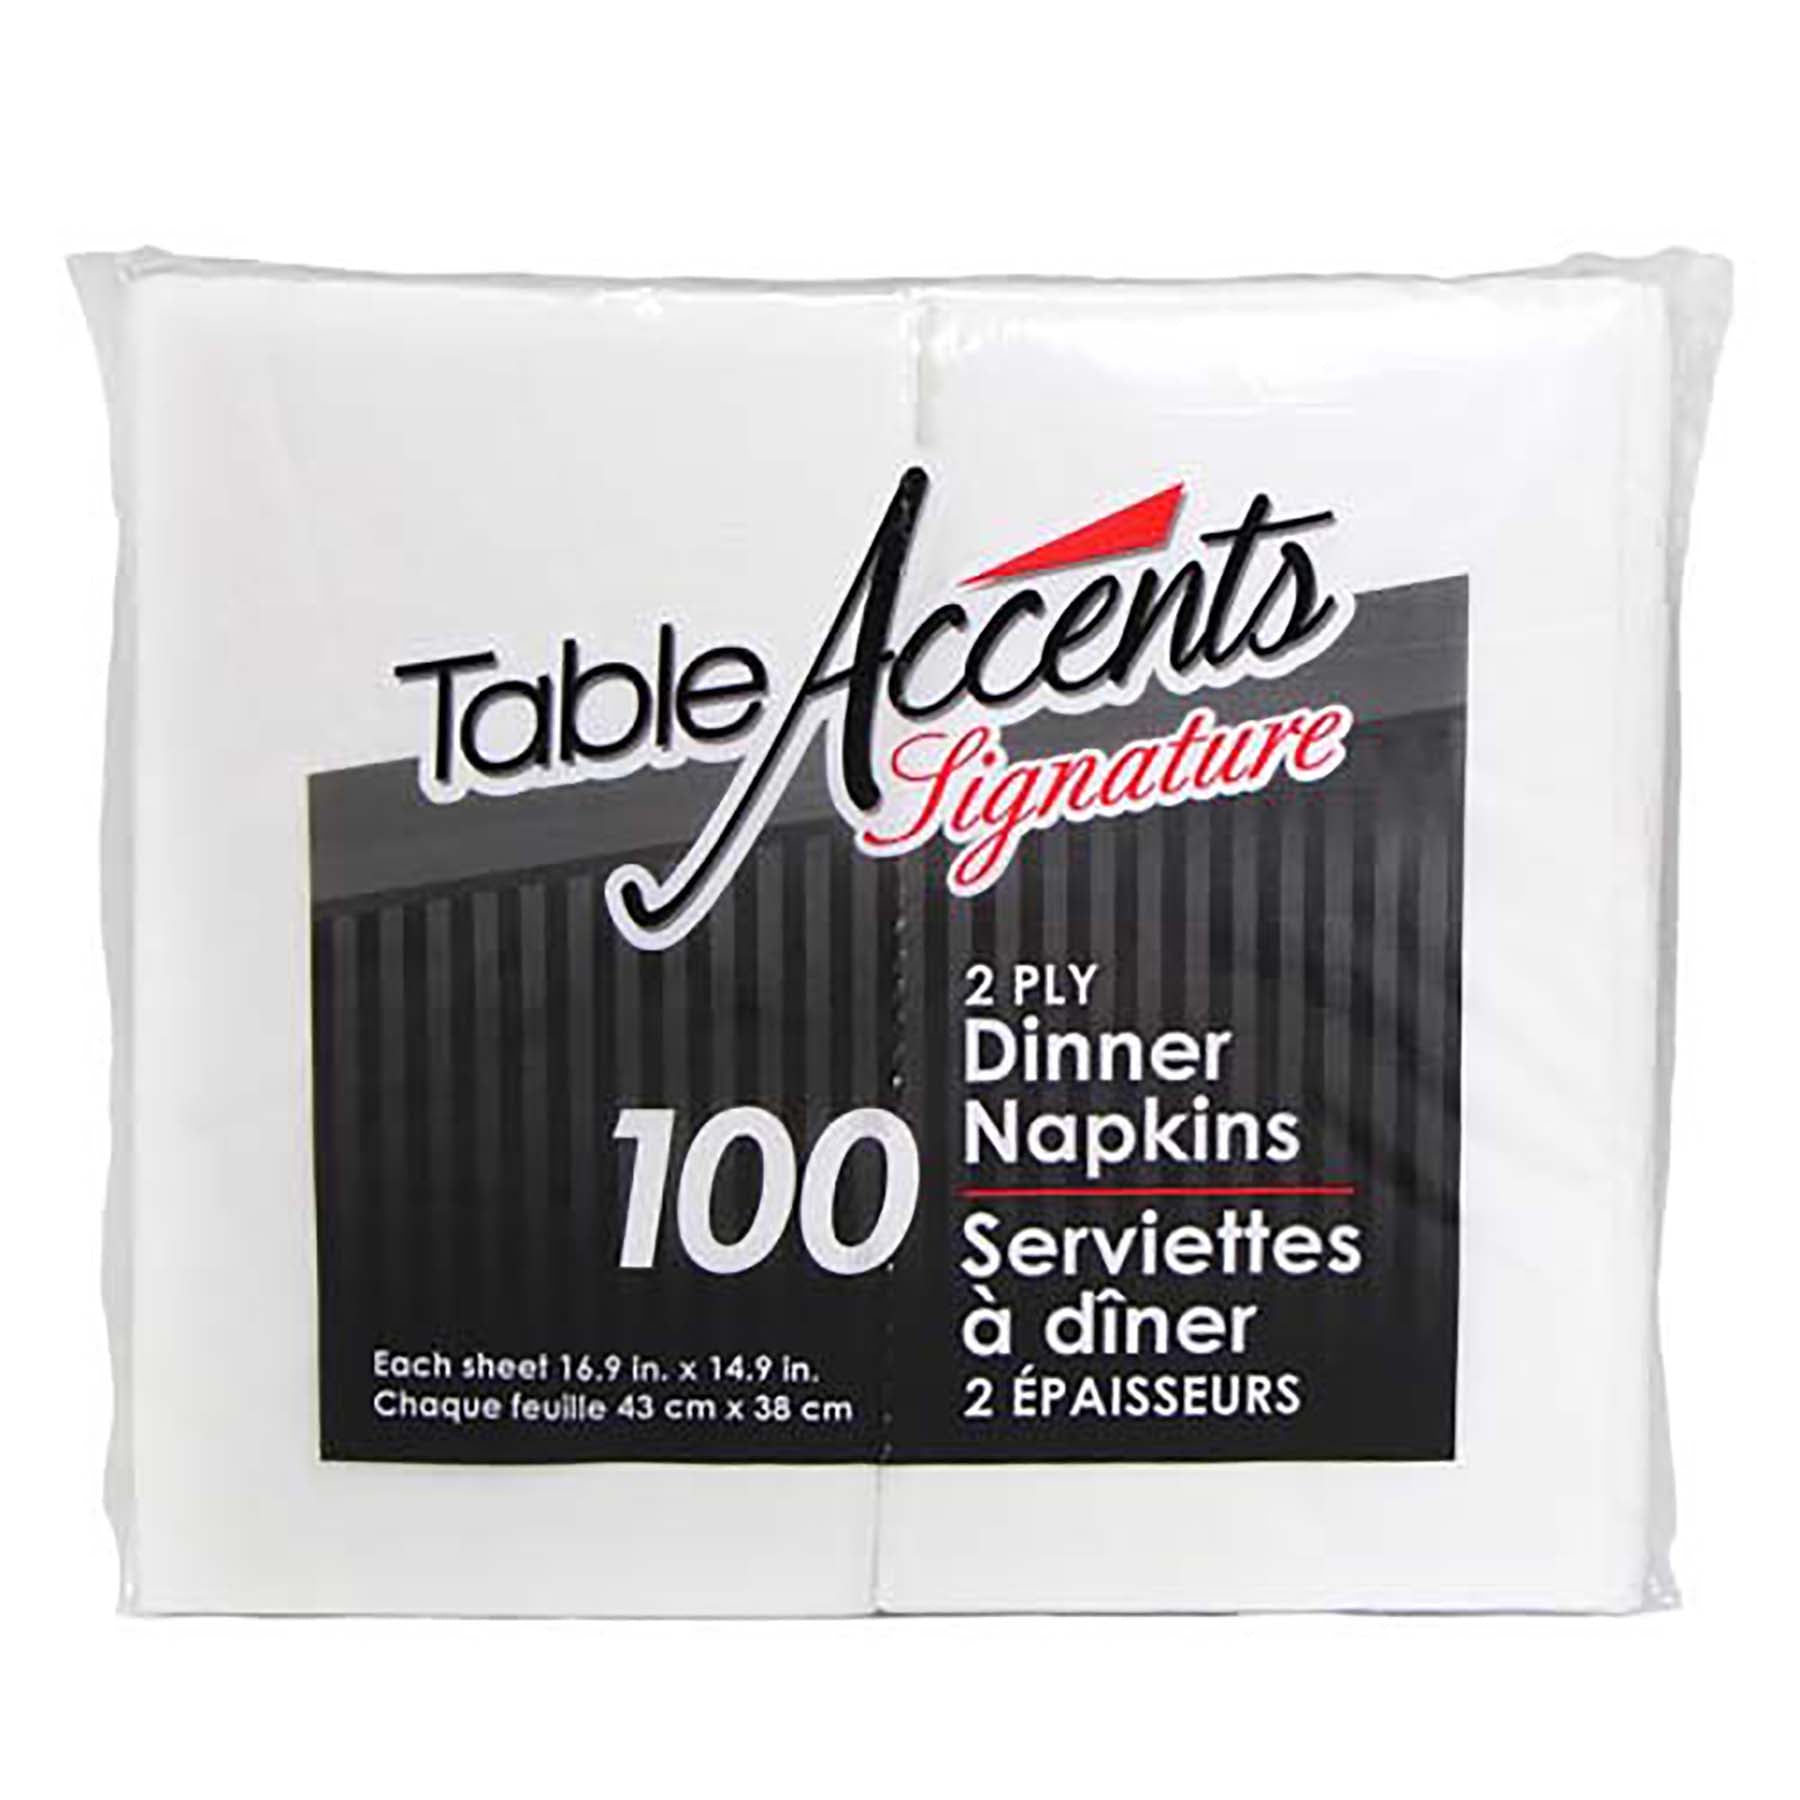 Table Accents 100 White Dinner Napkins 2 Ply 16.9x14.9in